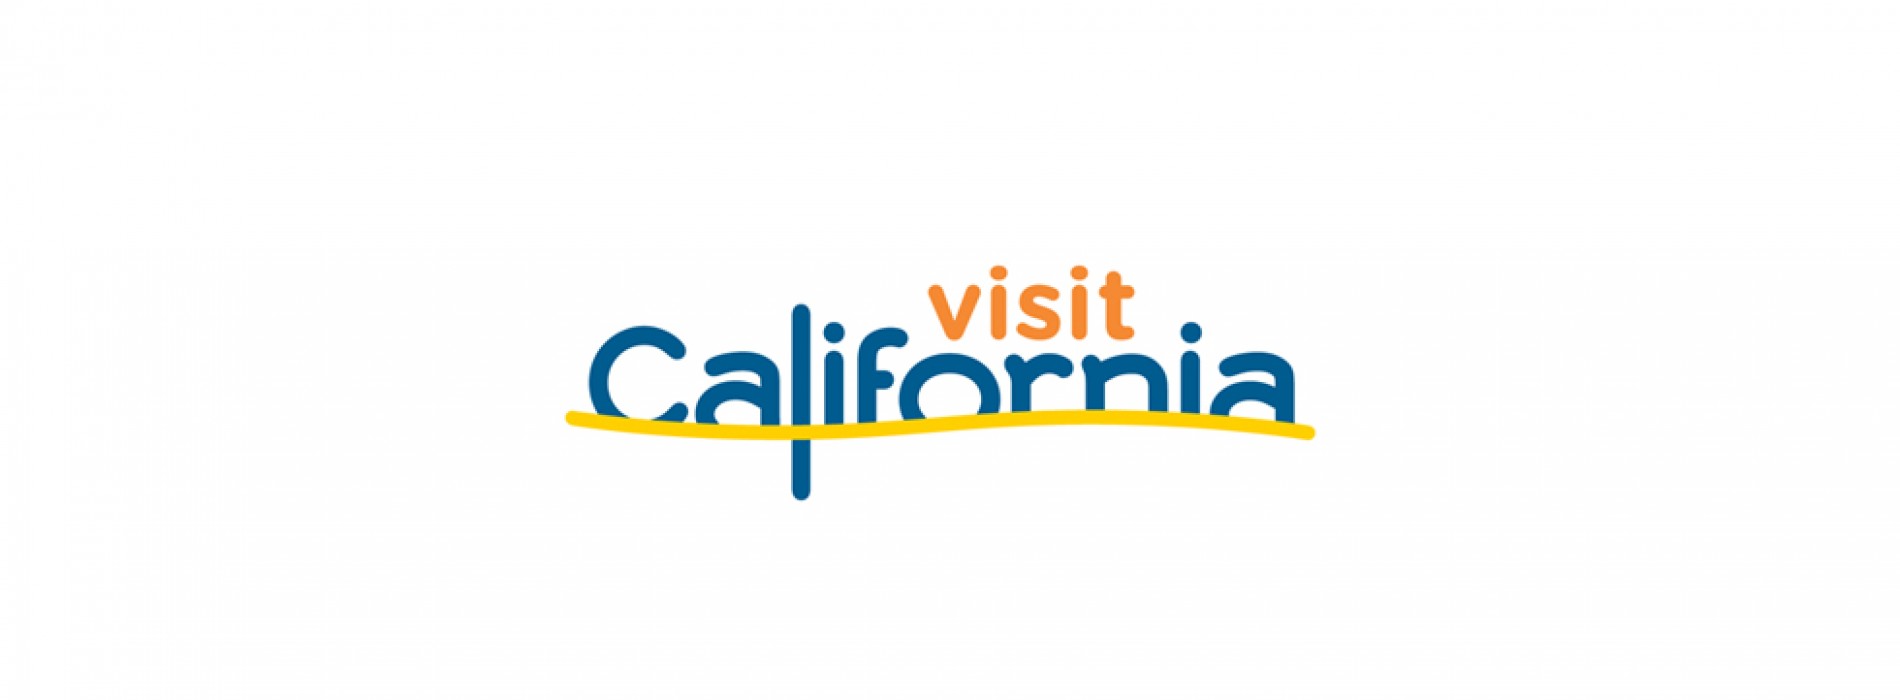 California eyes India for Tourism growth to the Golden State